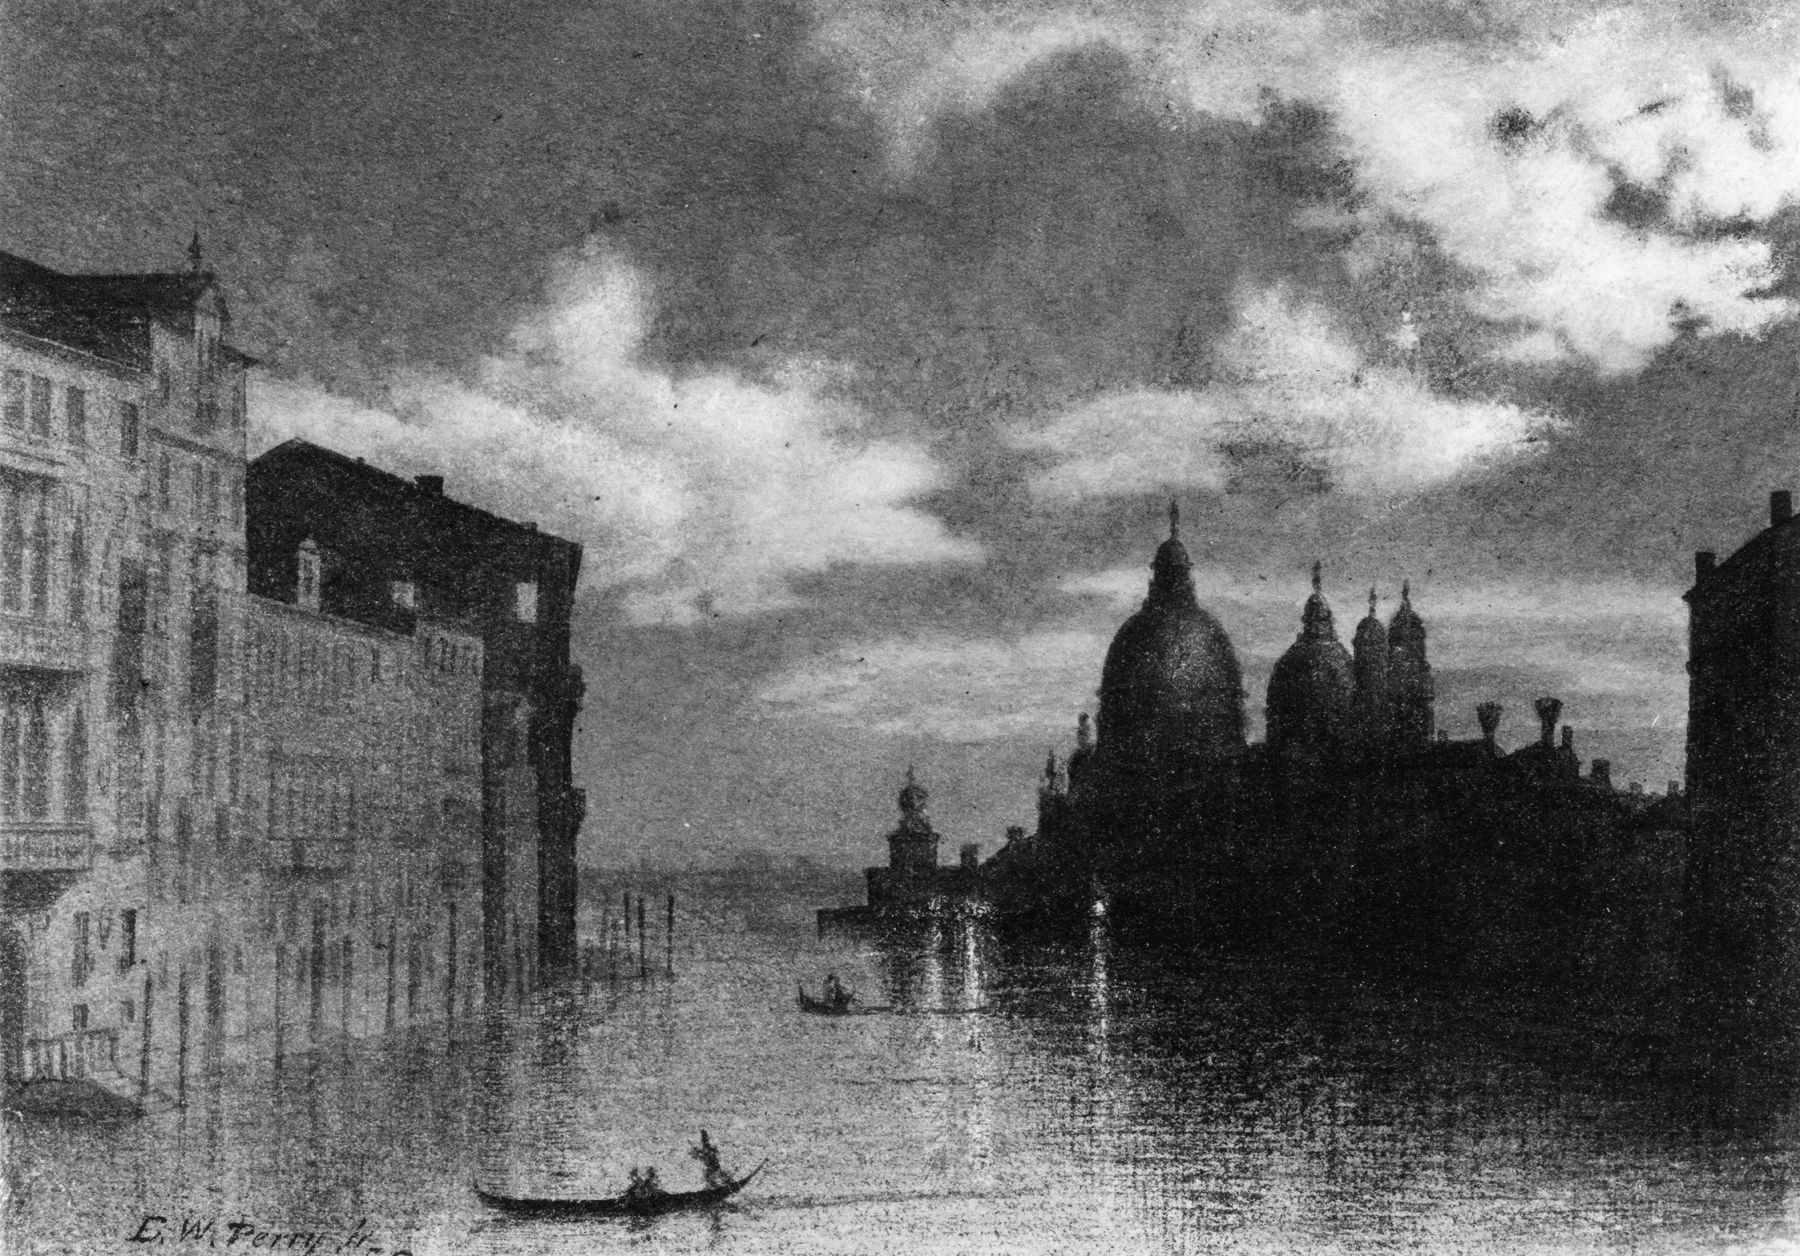 Image for Venice, the Grand Canal at Night